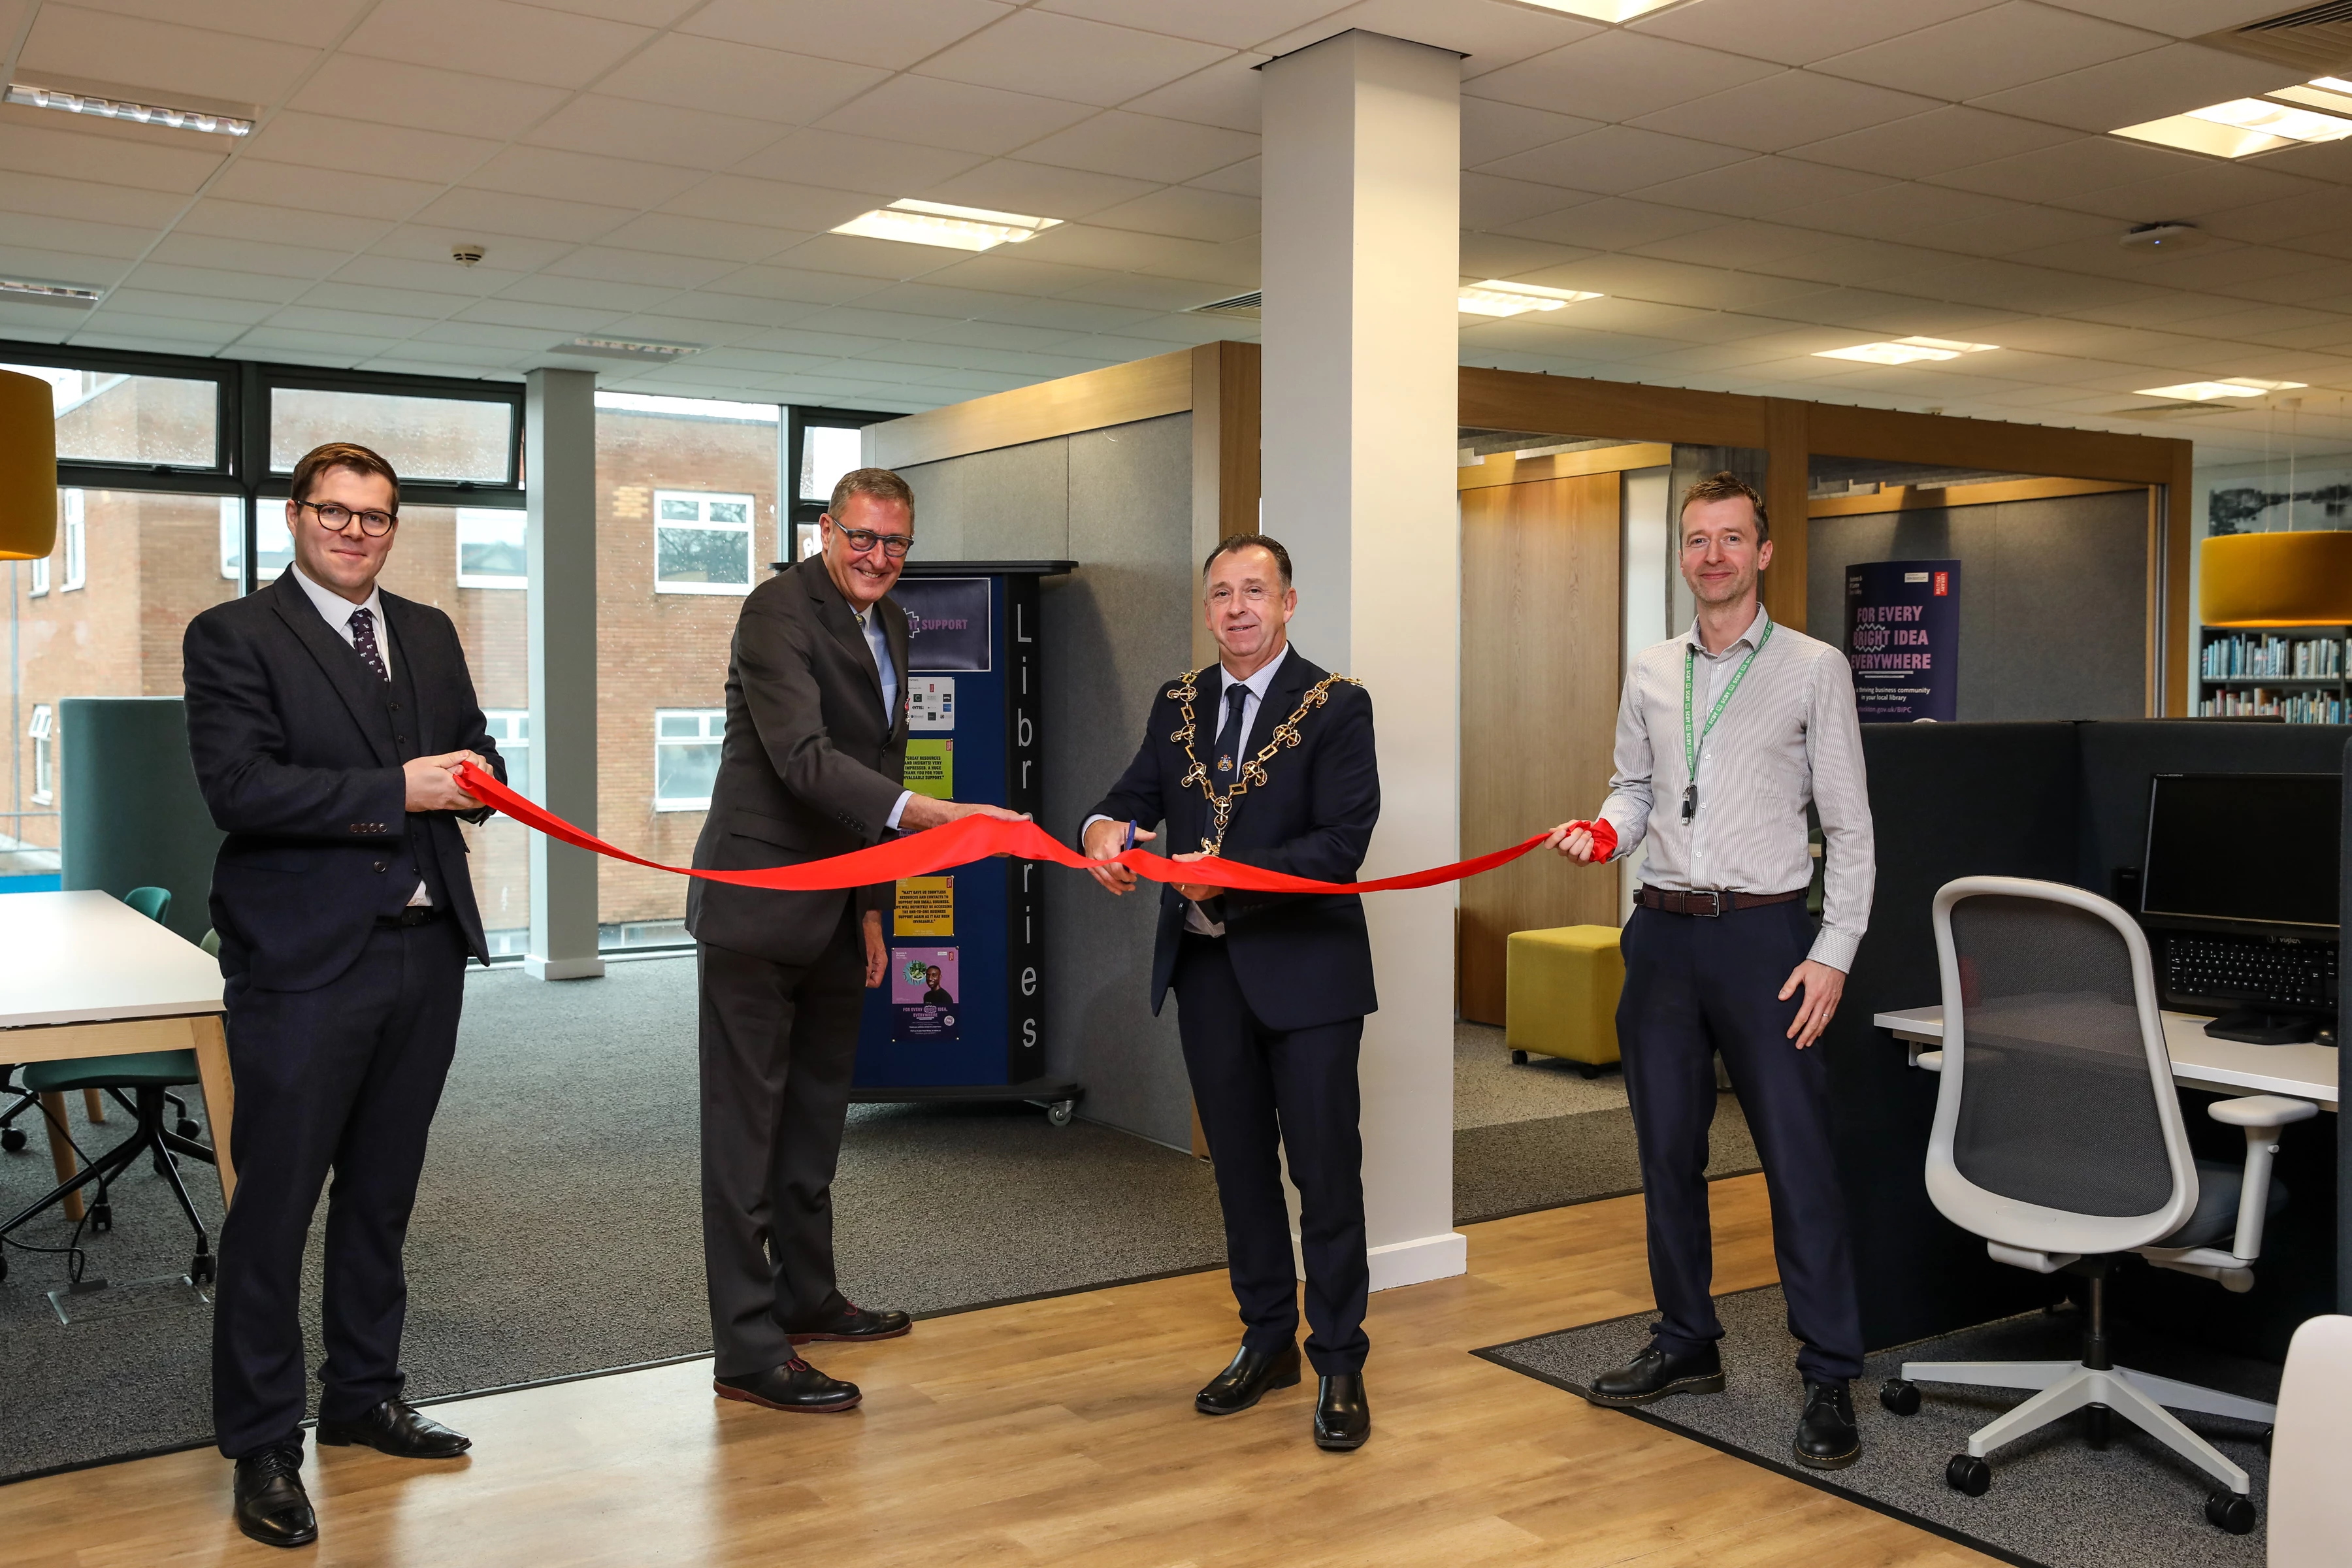 Mayor of Stockton-on-Tees, Cllr Kevin Faulks, officially opens the Business & IP Centre Tees Valley